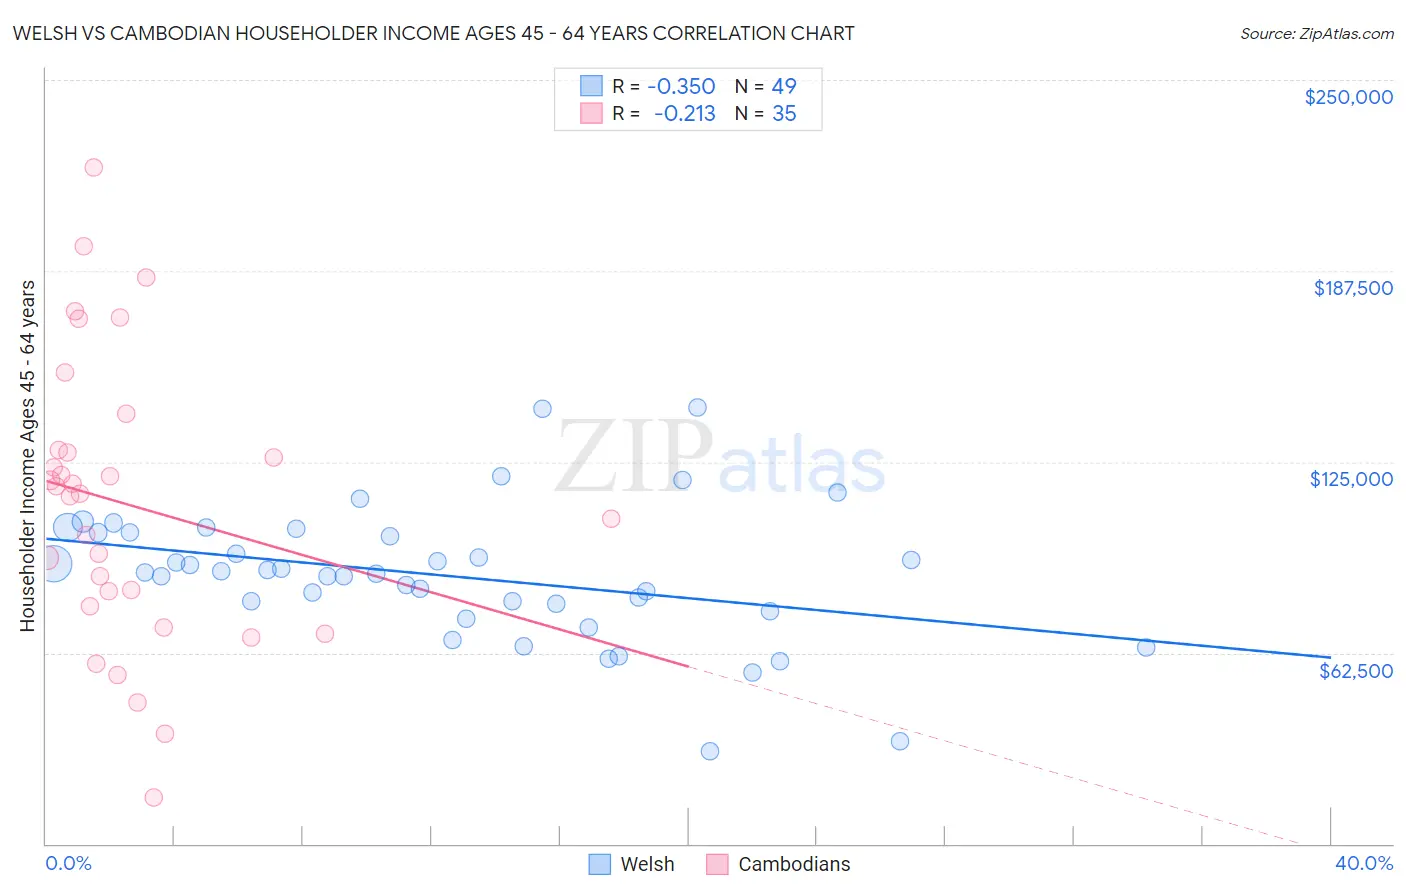 Welsh vs Cambodian Householder Income Ages 45 - 64 years